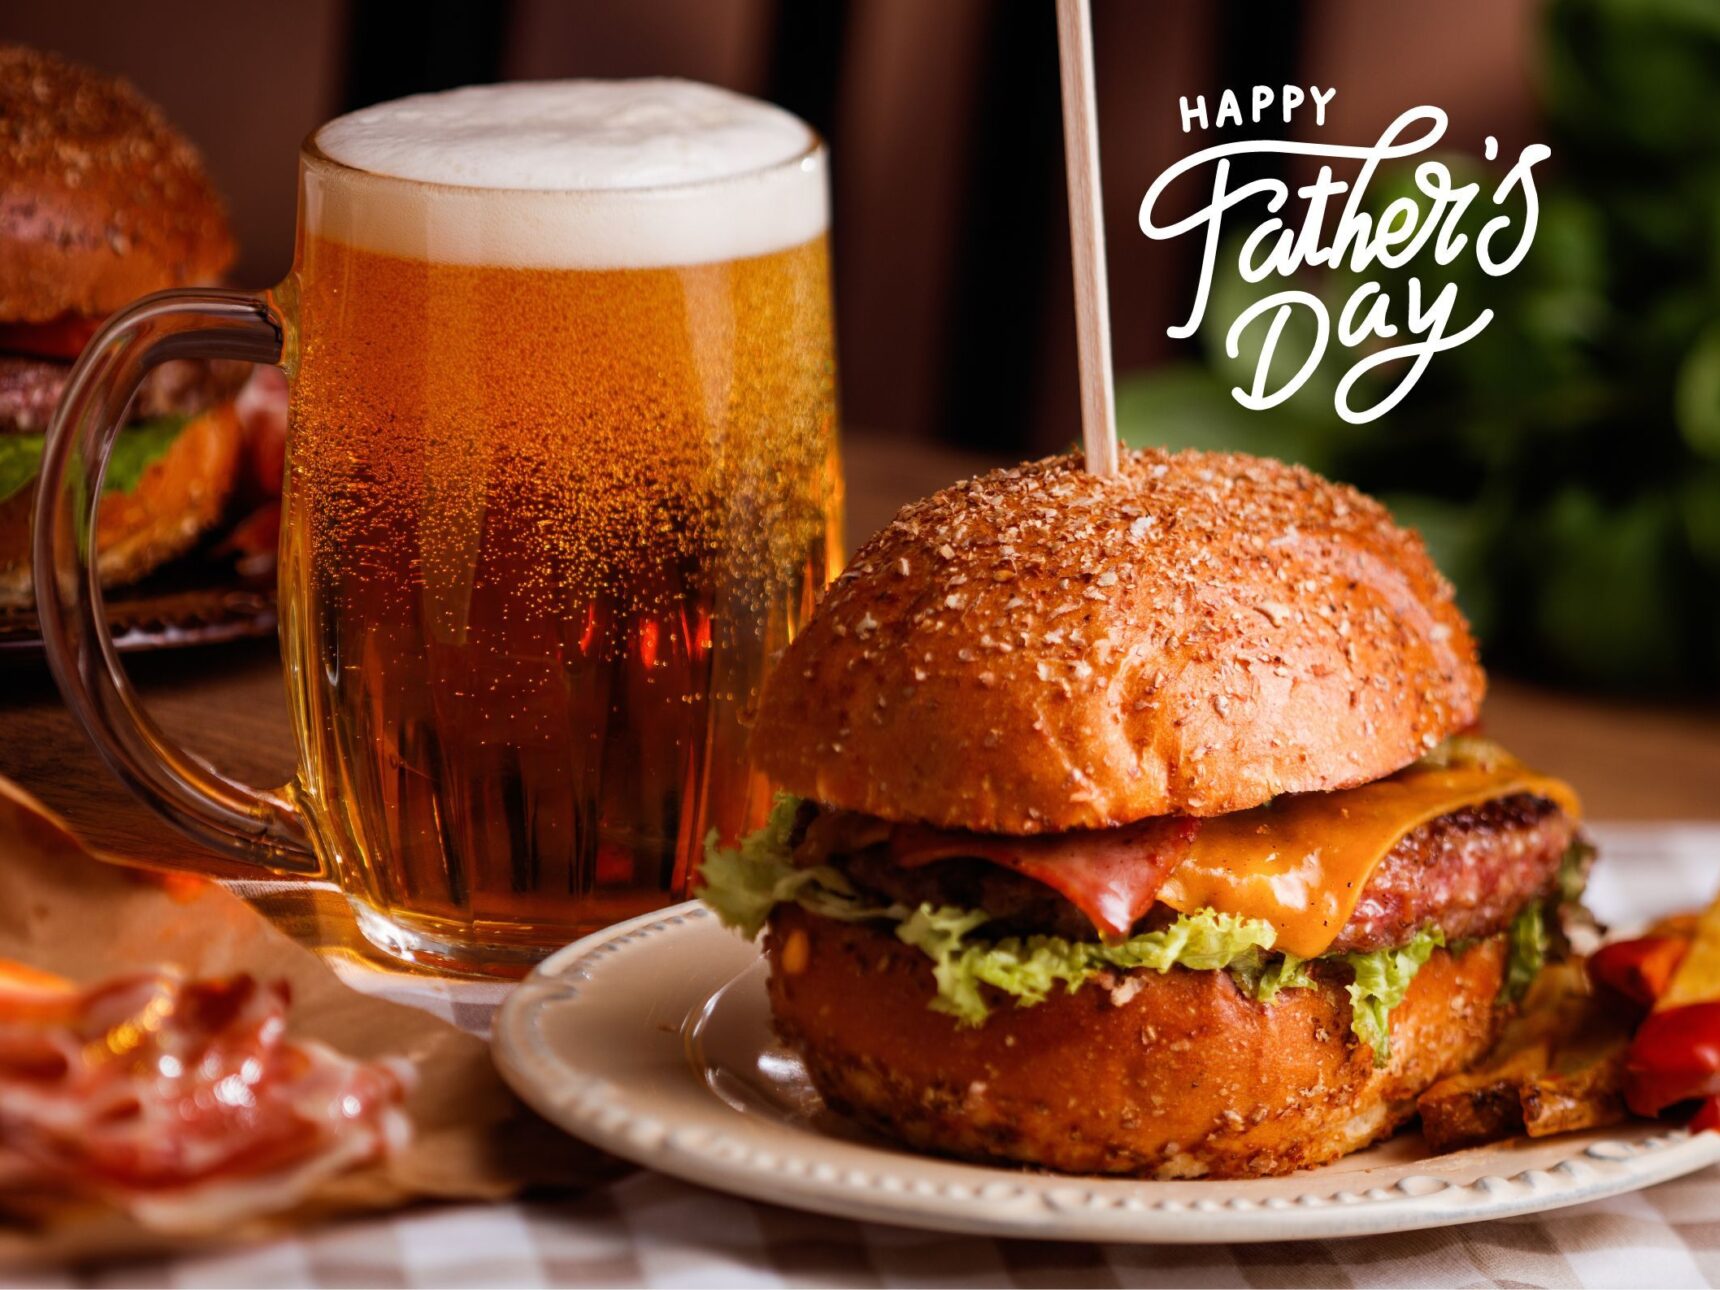 Treat the father figure in your life to a delicious burger and beer on us this Father's Day